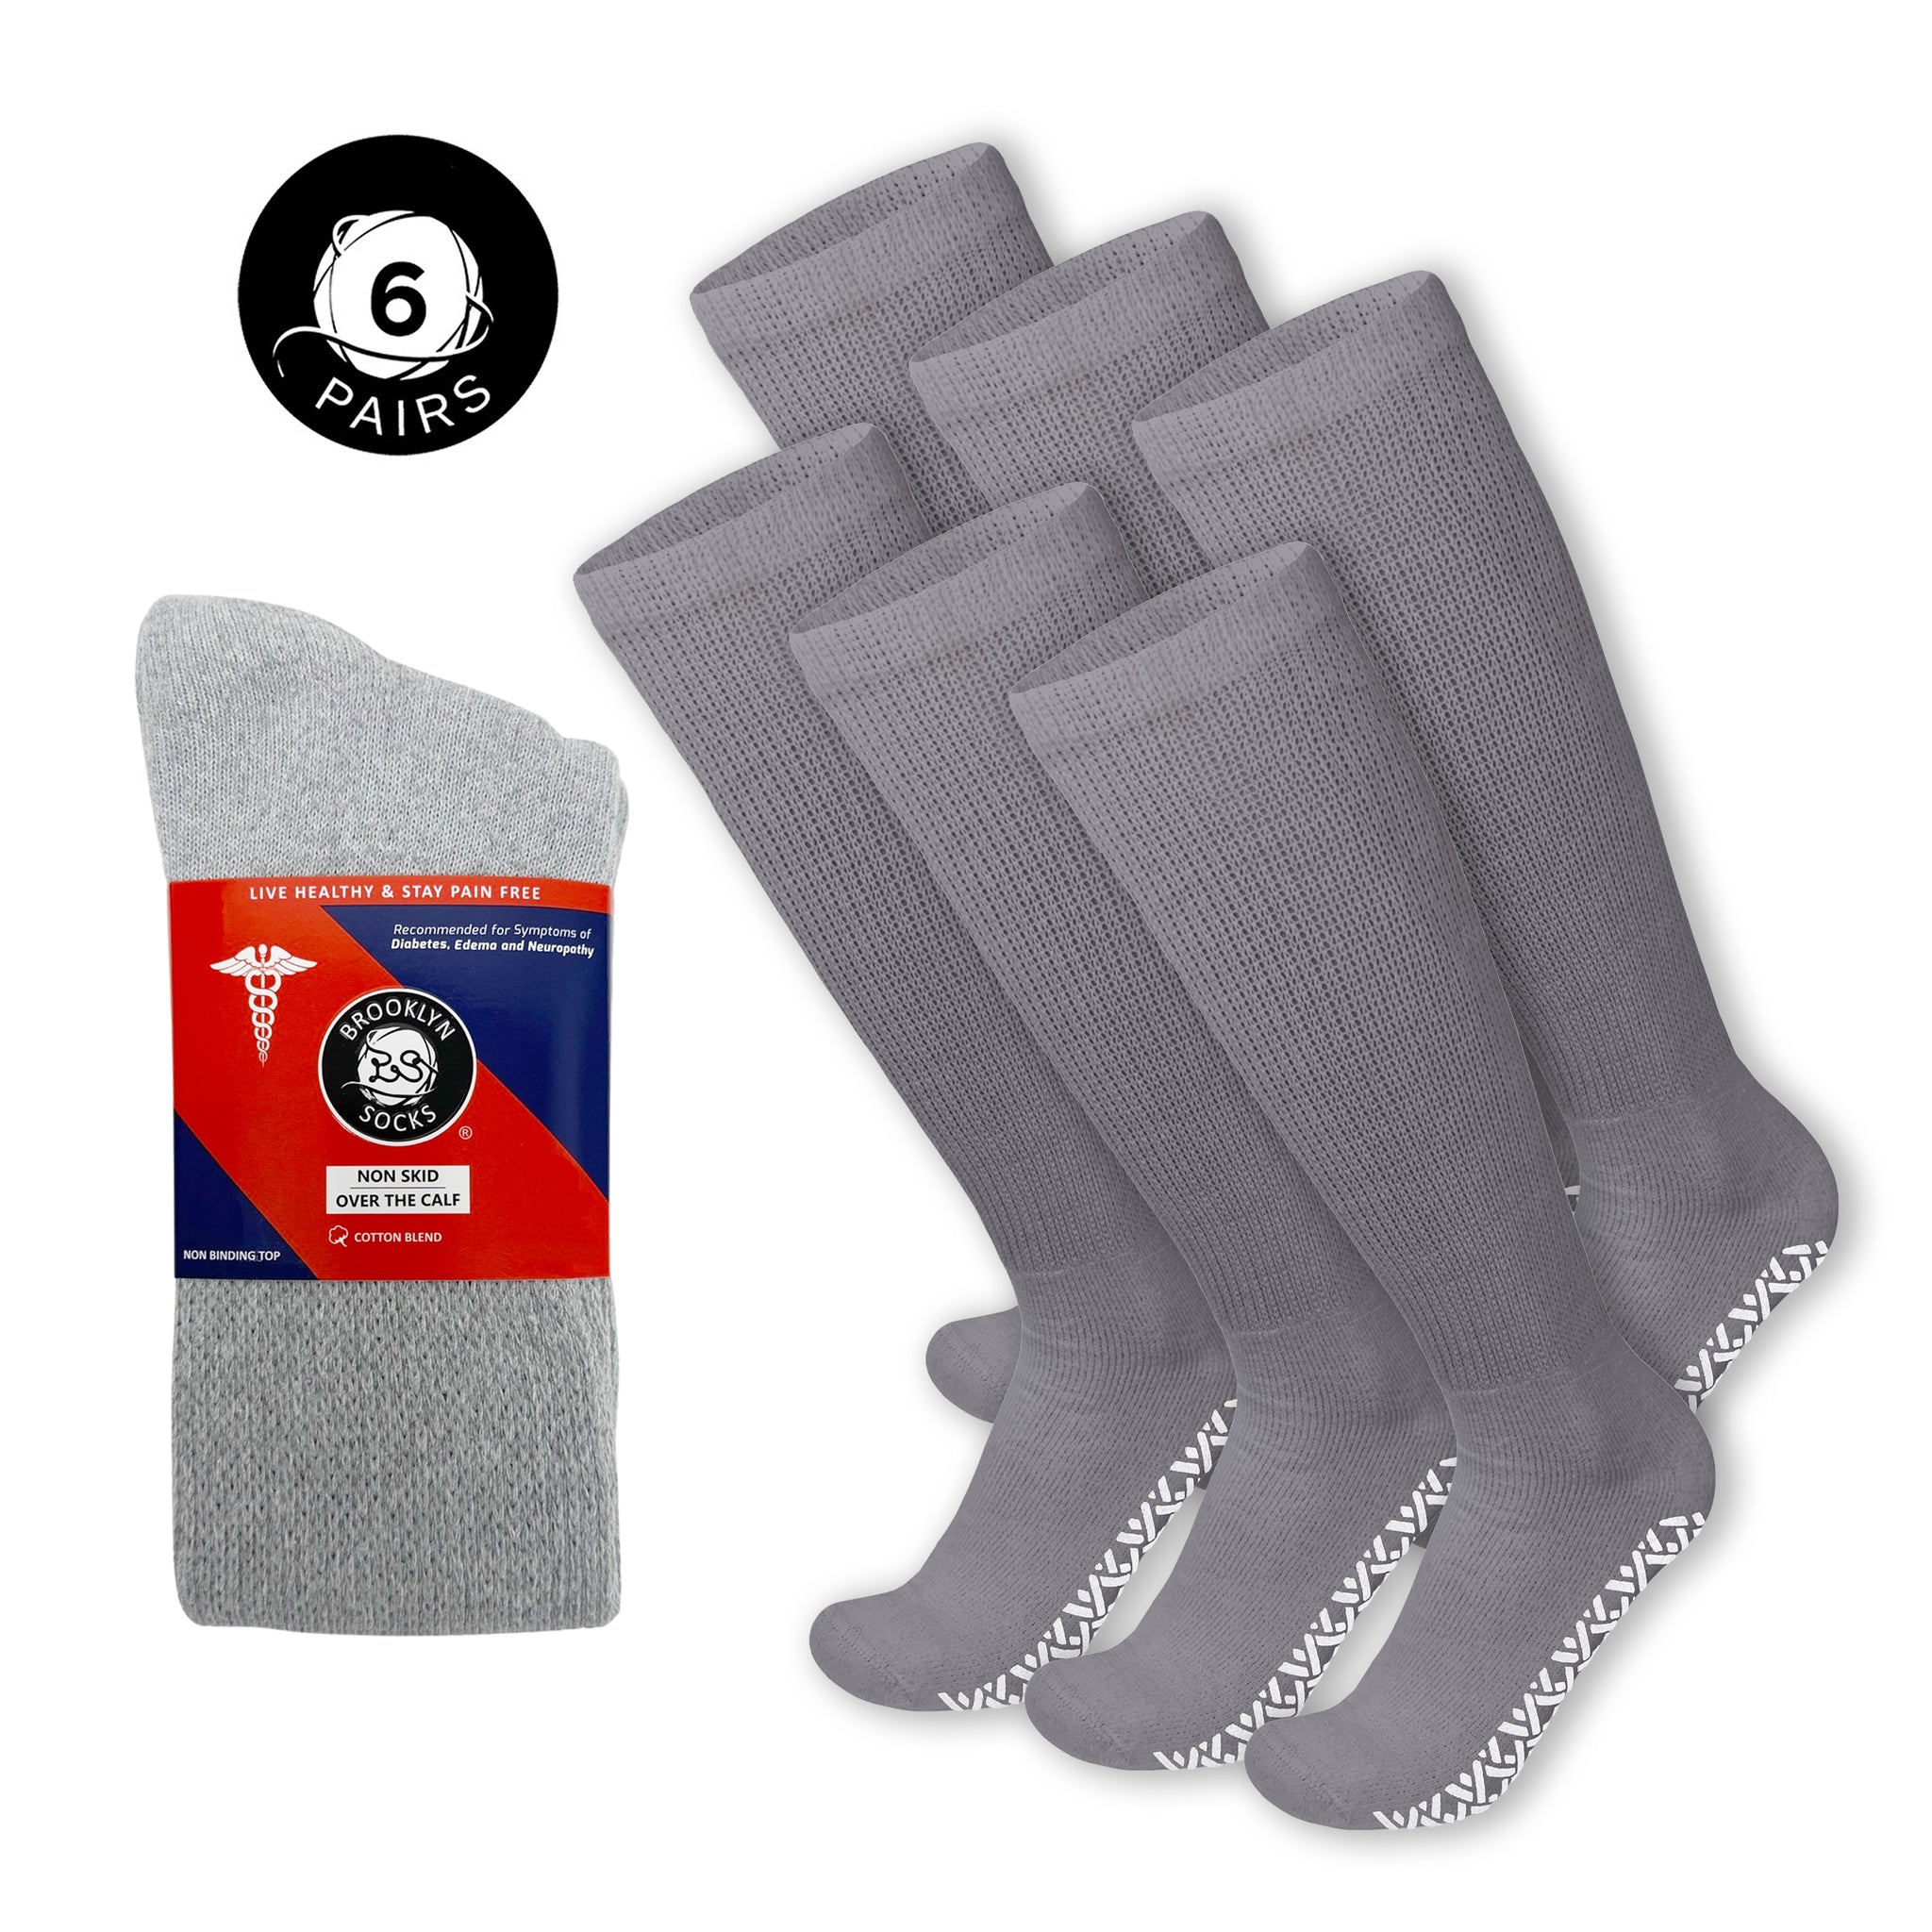 6 Pairs of Non-Skid Over-The-Calf Diabetic Cotton Socks with Non Bindi –  Wholesale Diabetic Socks